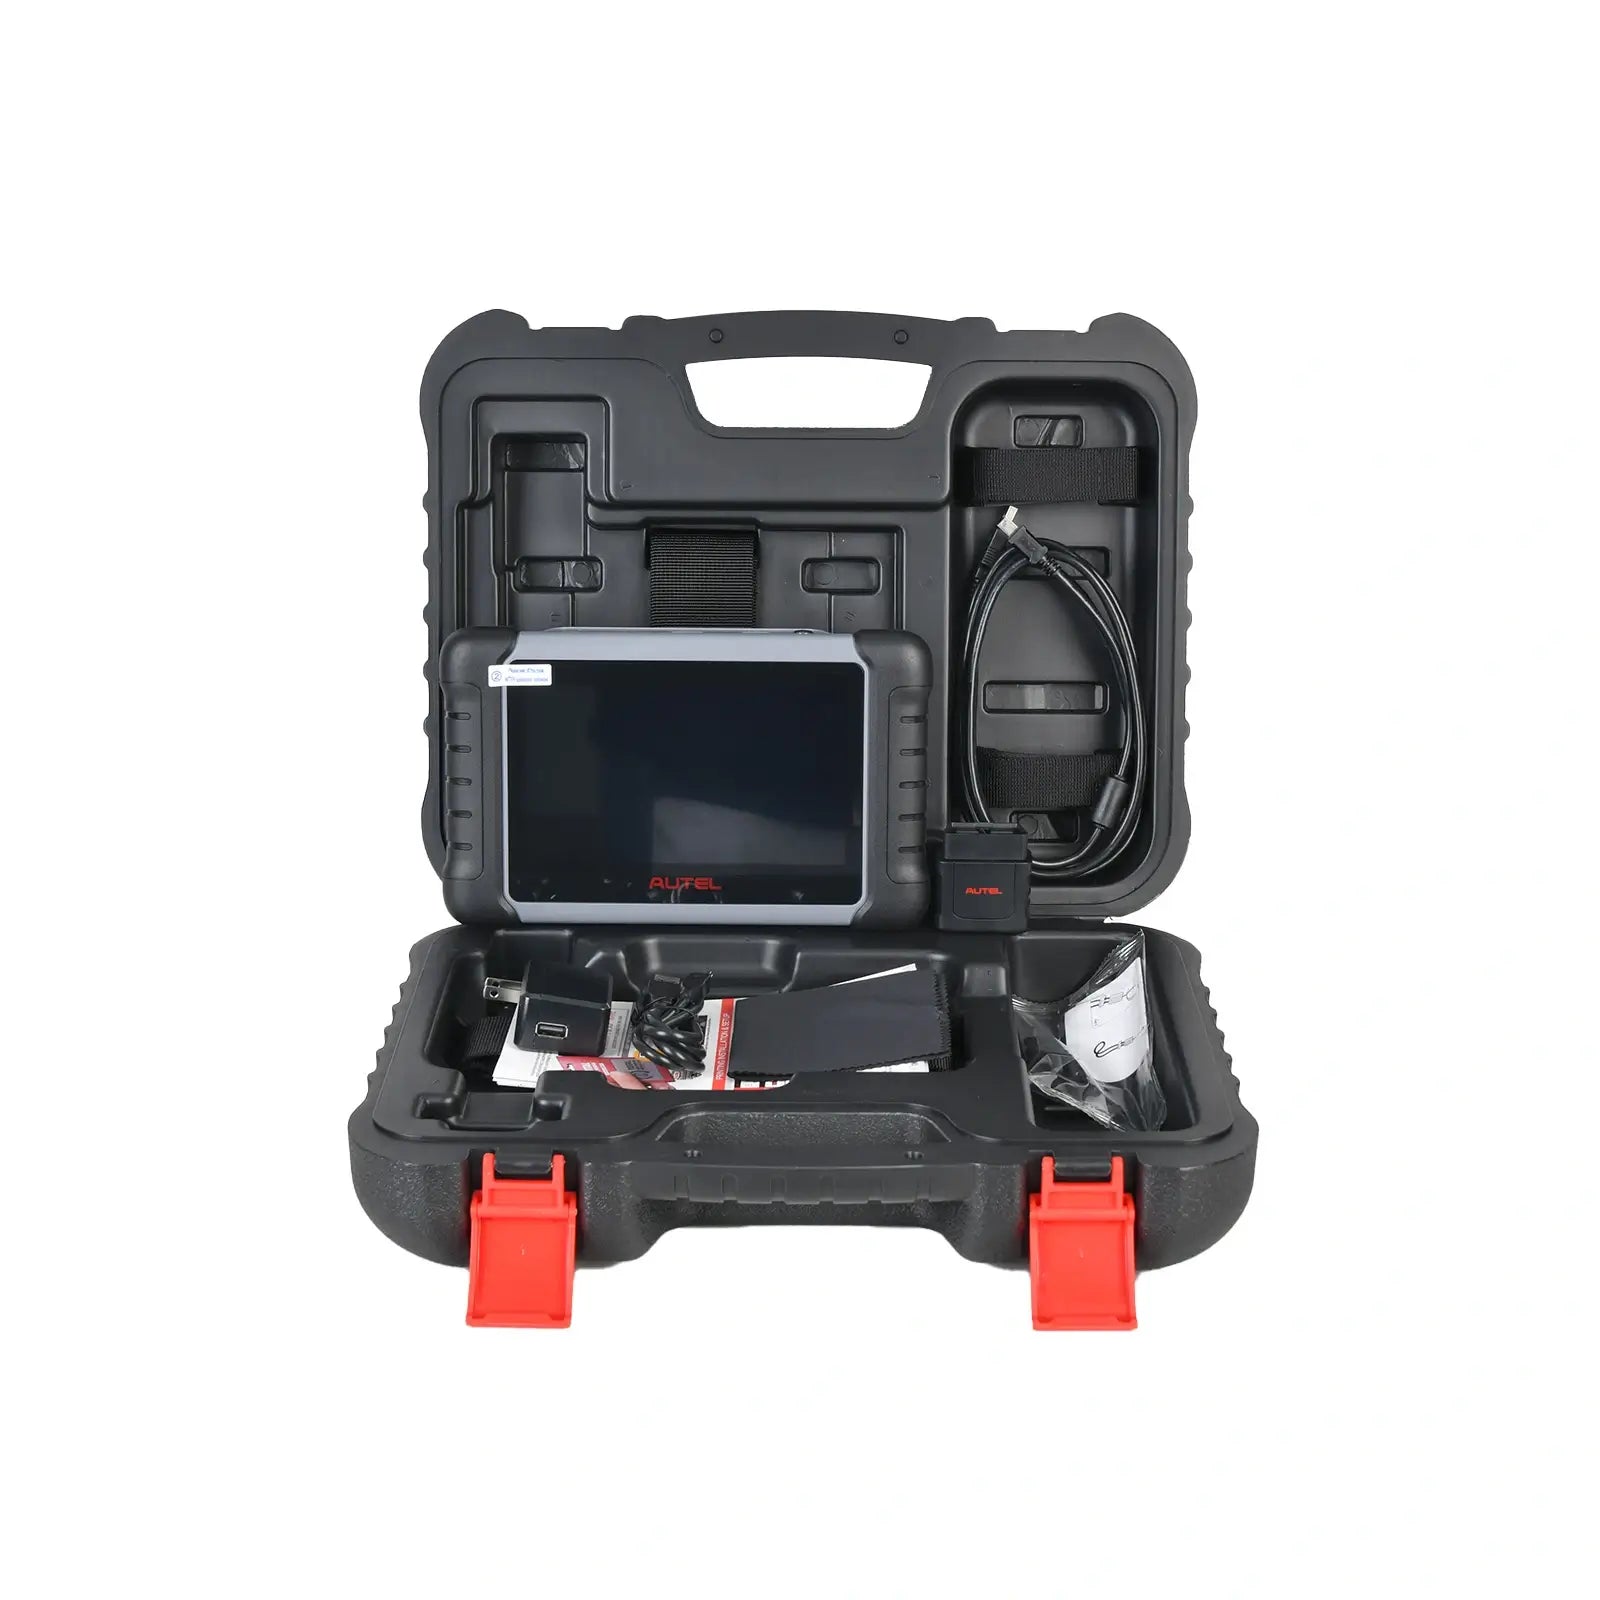 [US Ship] Autel MaxiPRO MP808BT Pro Kit Automotive Diagnostic Scanner Support Bi-Directional Control, 30 + Services & All System Diagnostics, Key Coding, Oil Reset, EPB, SAS, DPF with 2 Years Free Update - AutelTool.us